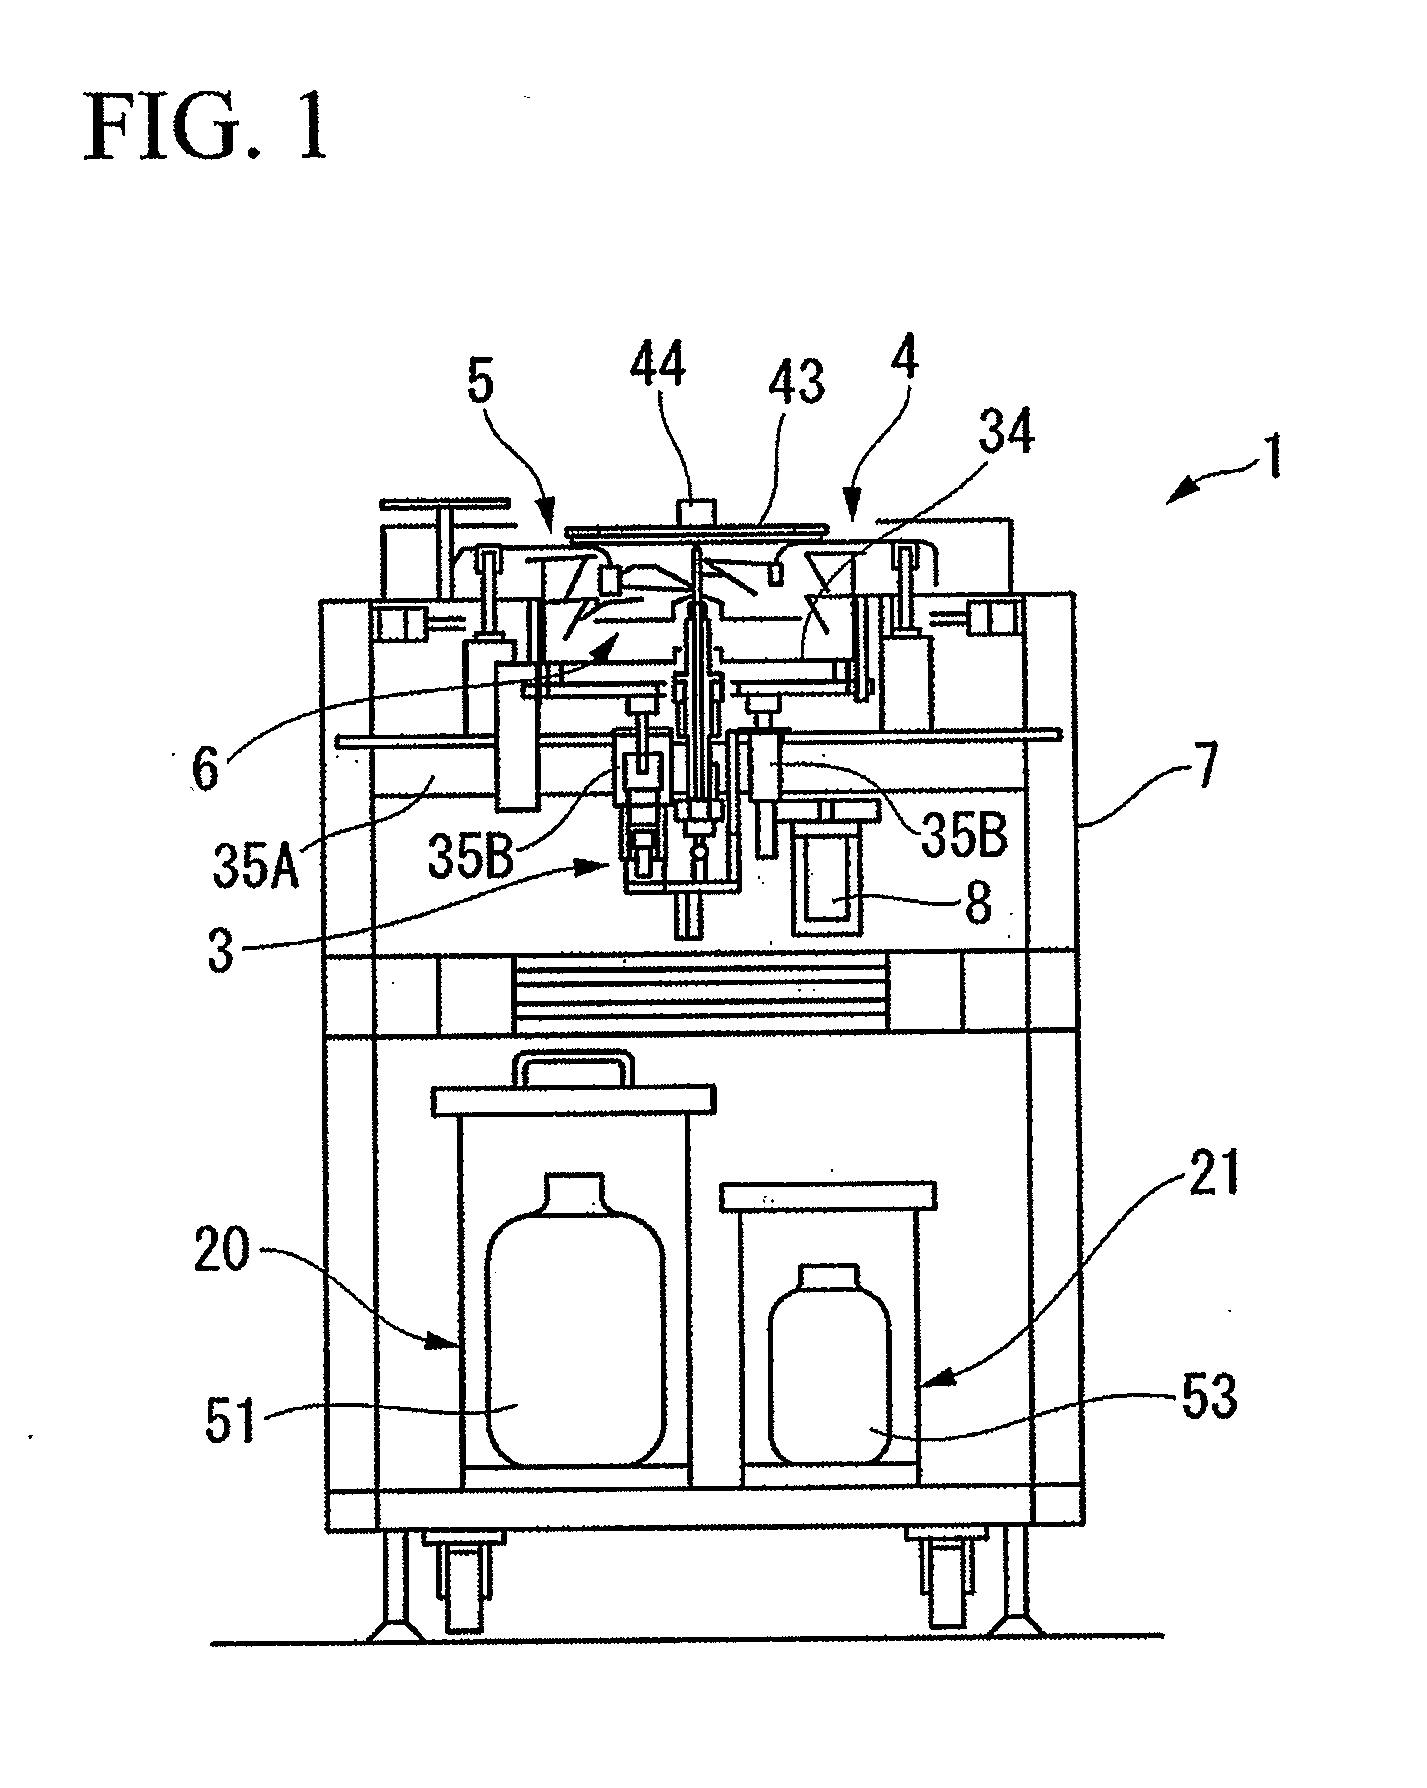 Double-sided coating apparatus and method for double-sided coating with coating solution